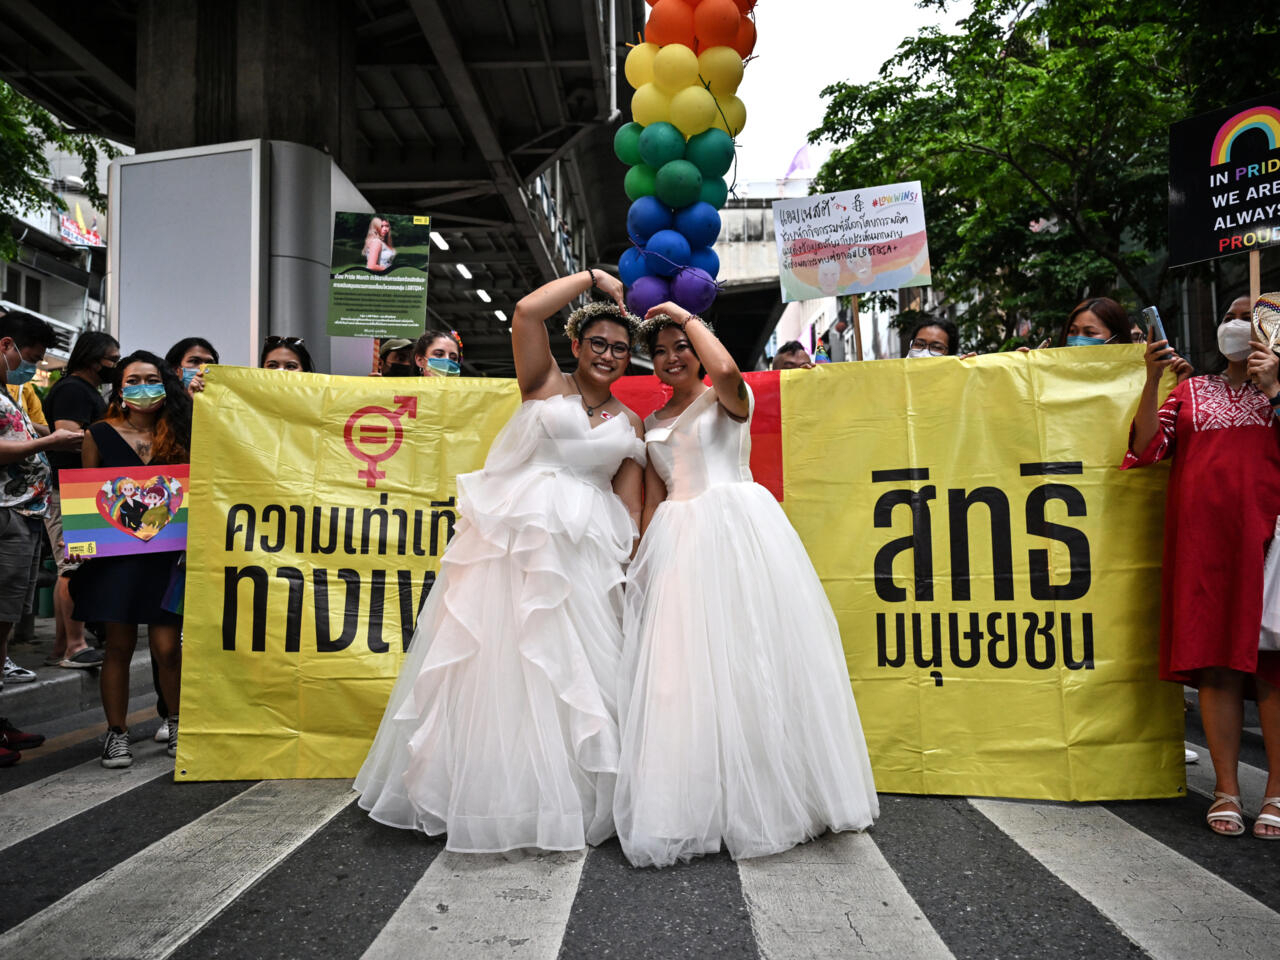 Thailand Approves Same Sex Marriage, Passes Bill Into Law | Daily Report Nigeria